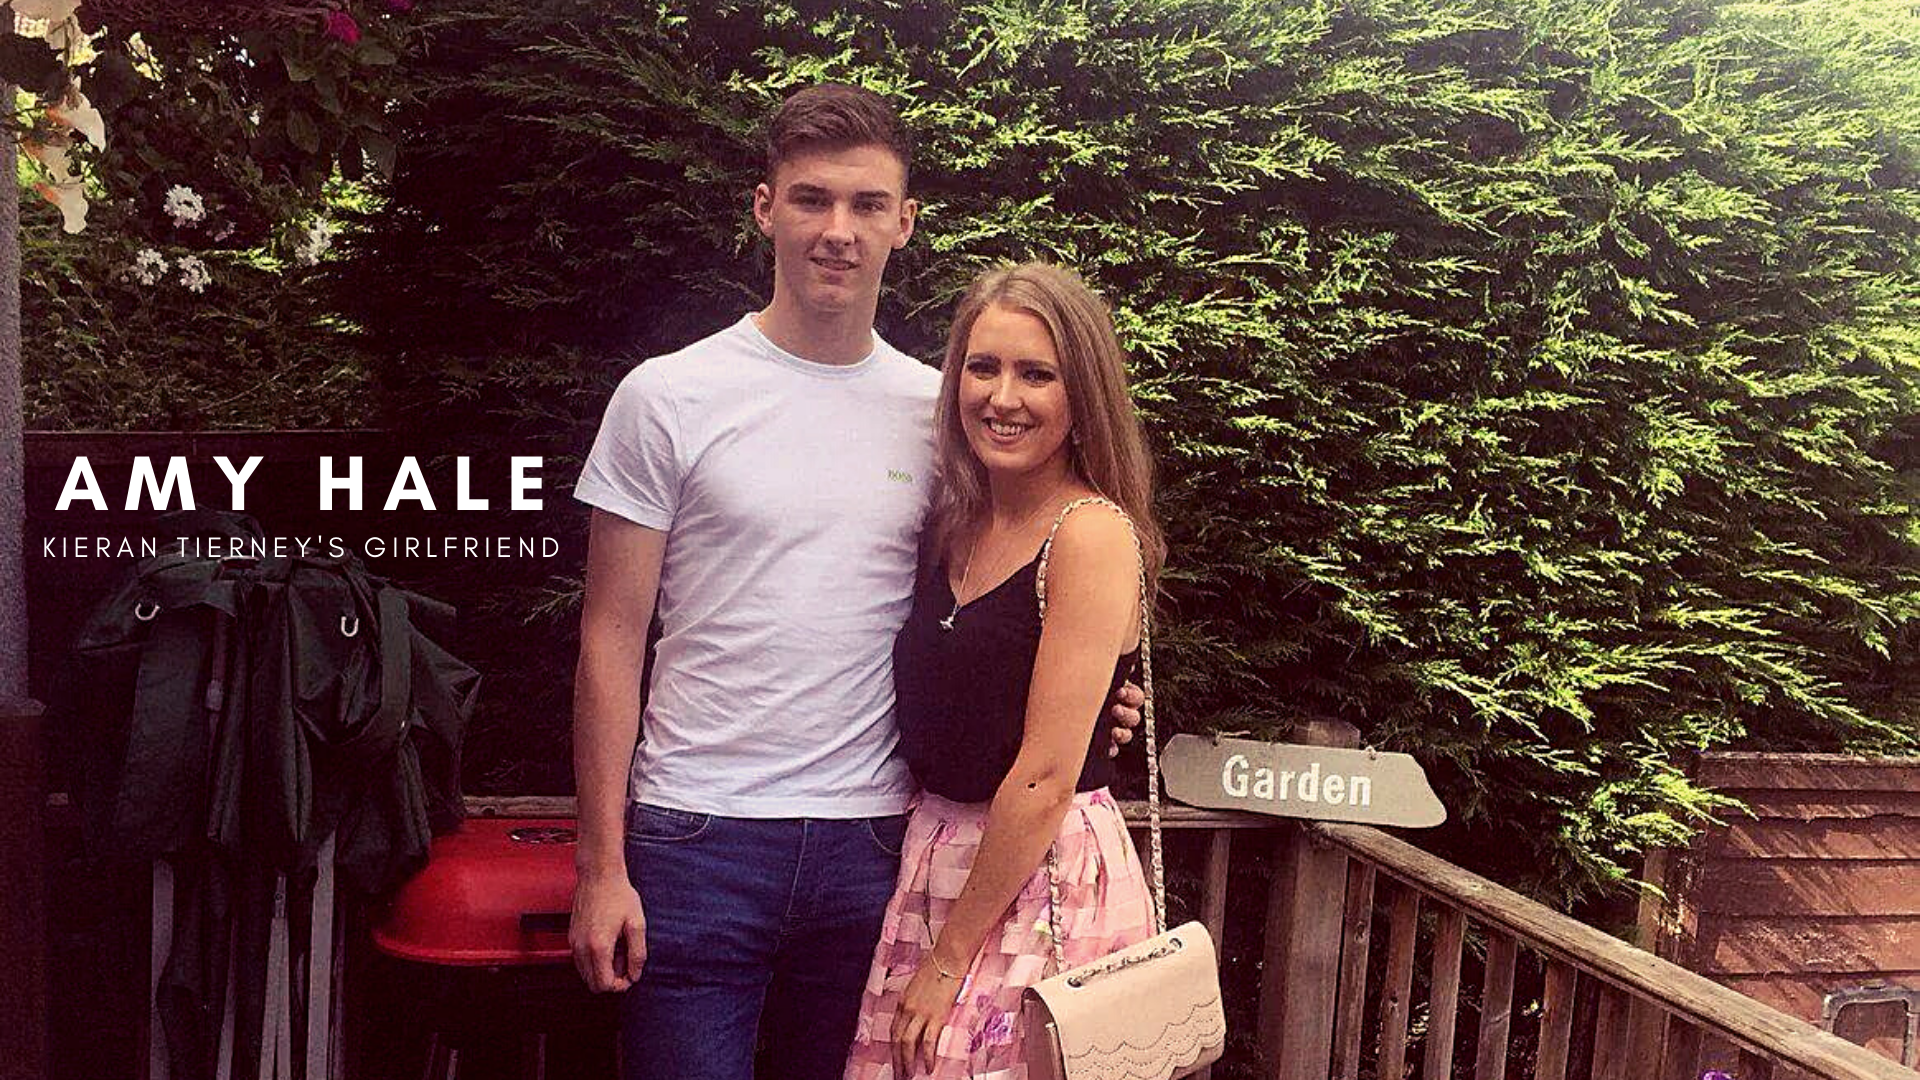 Kieran Tierney with his girlfriend Amy Hale. (Picture was taken from thescottishsun.co.uk)